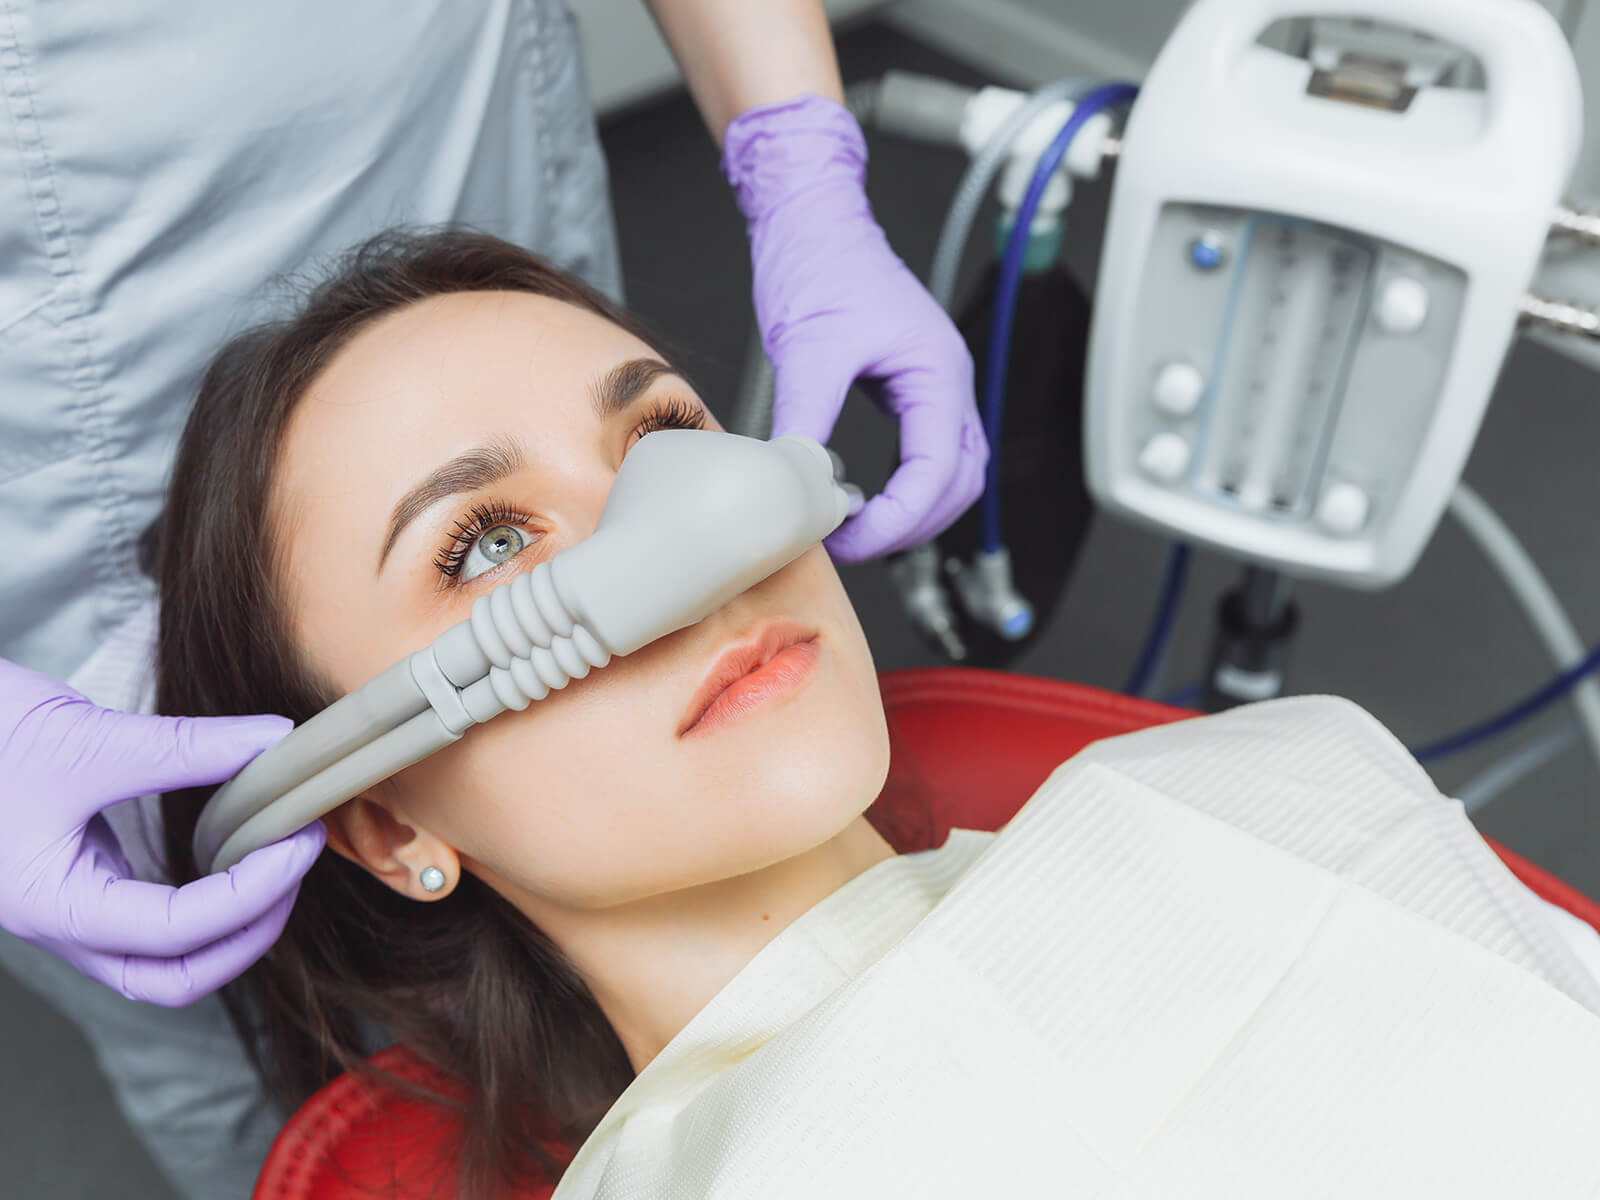 How To Calm Yourself With IV Sedation During Dental Sessions?